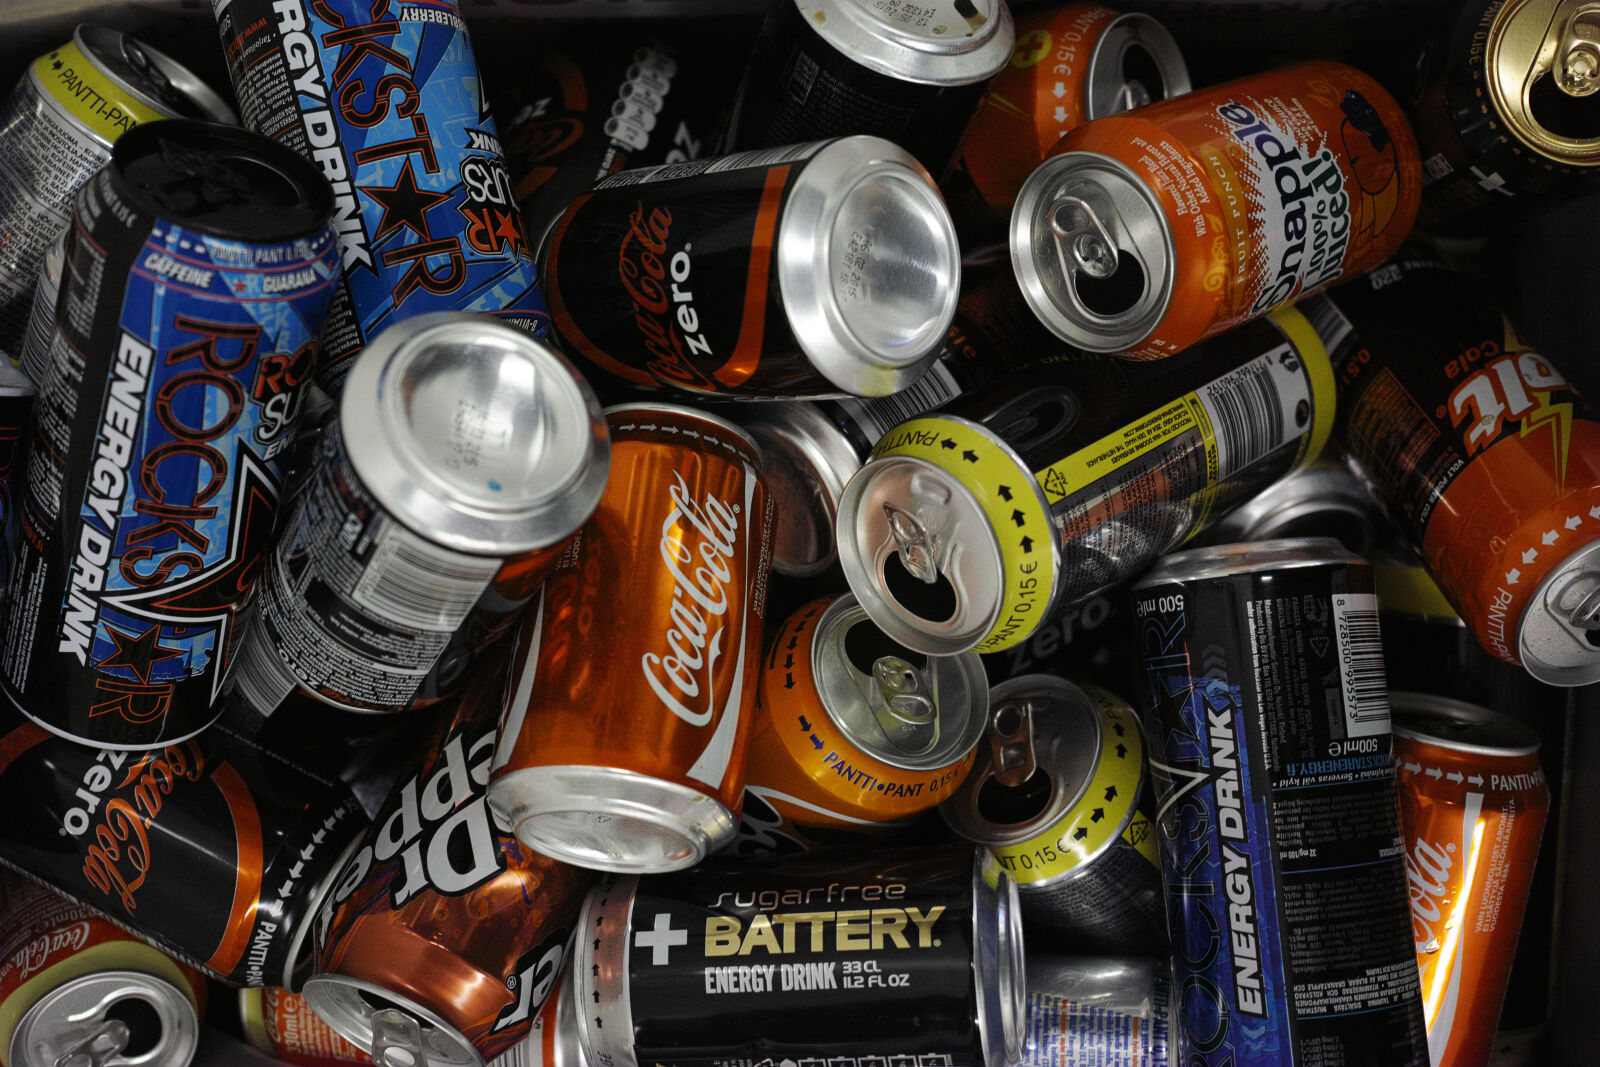 Sigma dp2 Quattro sample photo. Pile of cans photography